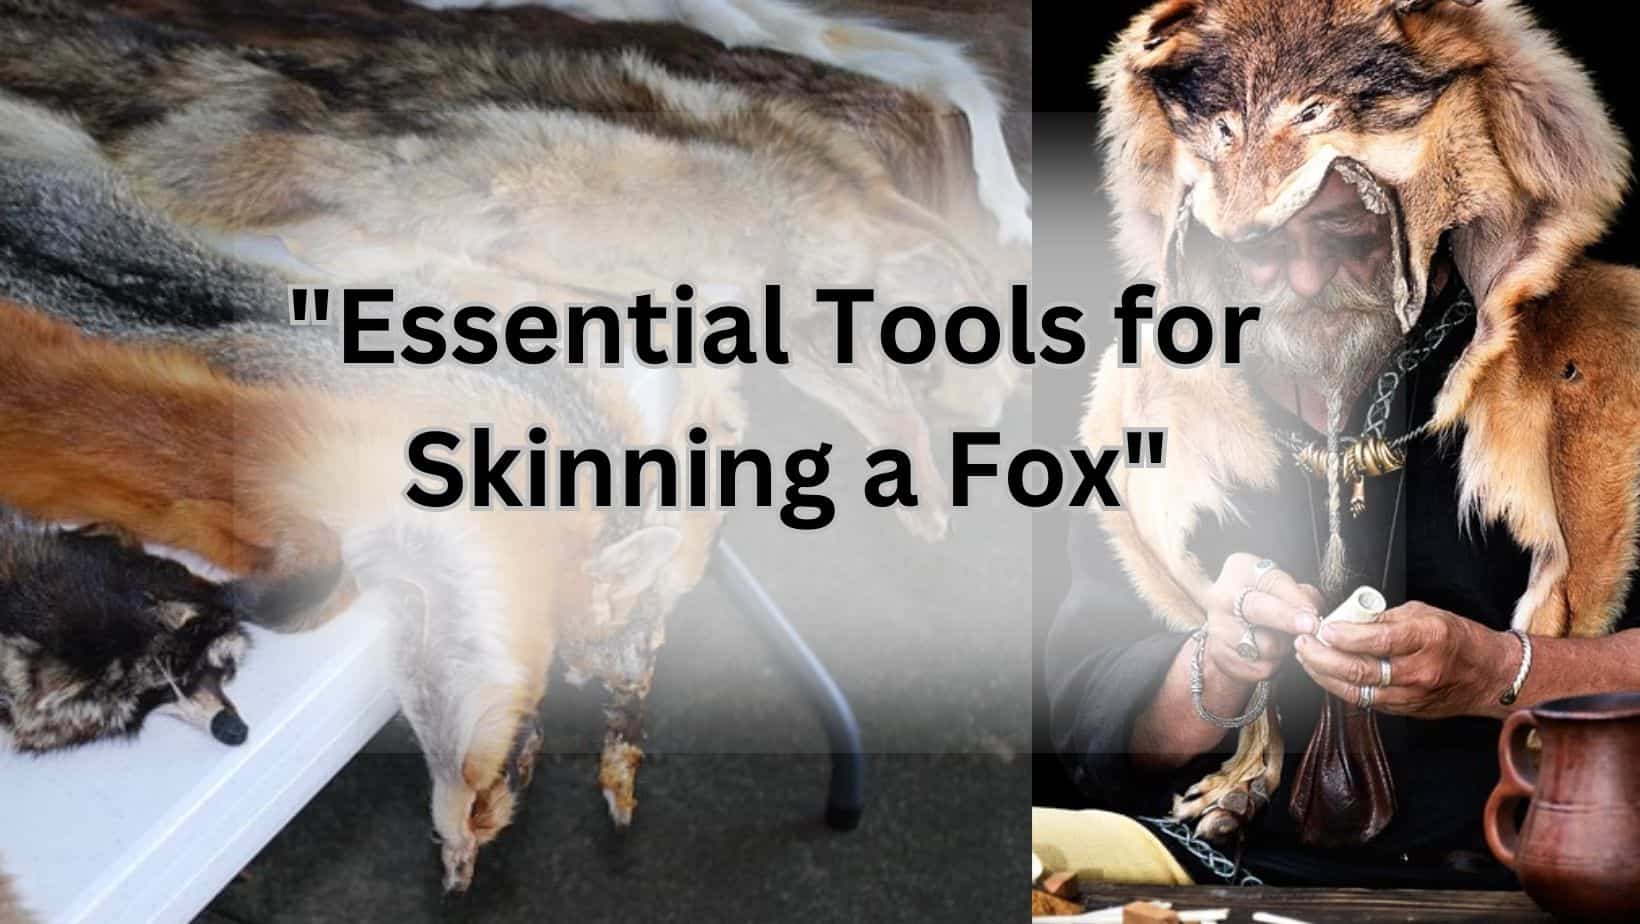 "Essential Tools for Skinning a Fox" Essential Tools for Skinning a Fox